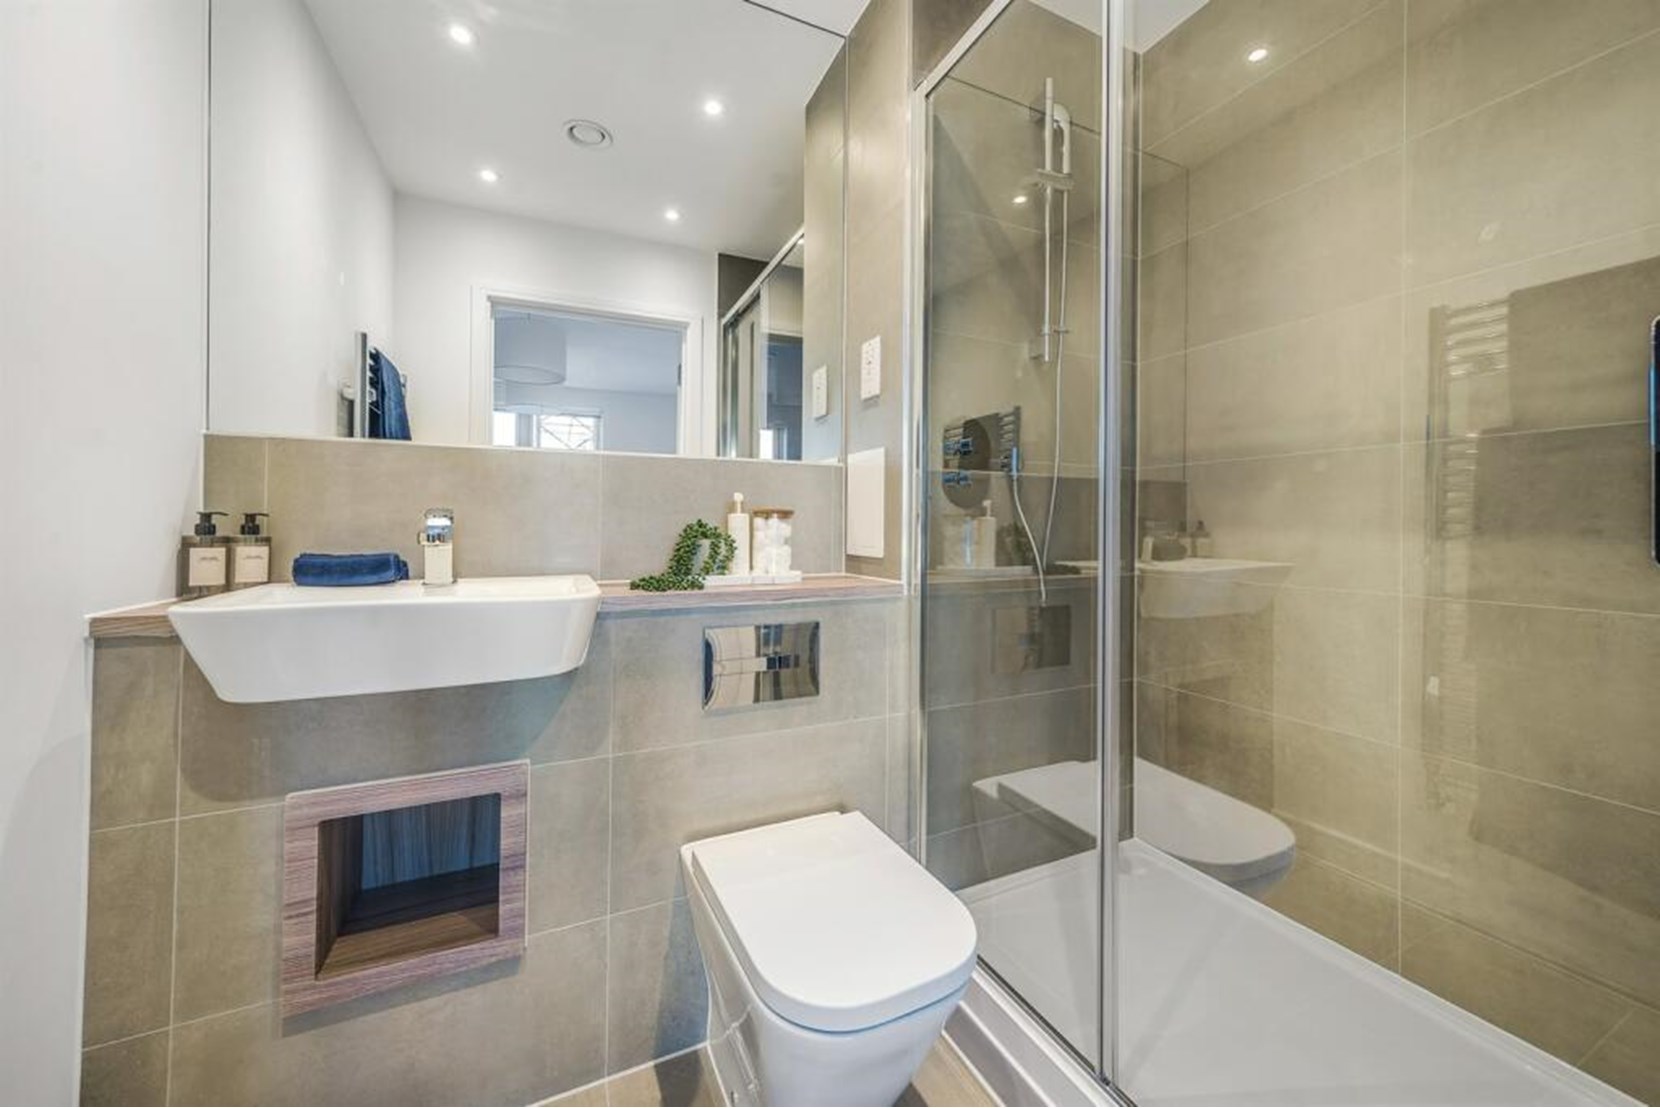 Apartments to Rent by Simple Life London in Ark Soane, Ealing, W3, The Sapphire ensuite